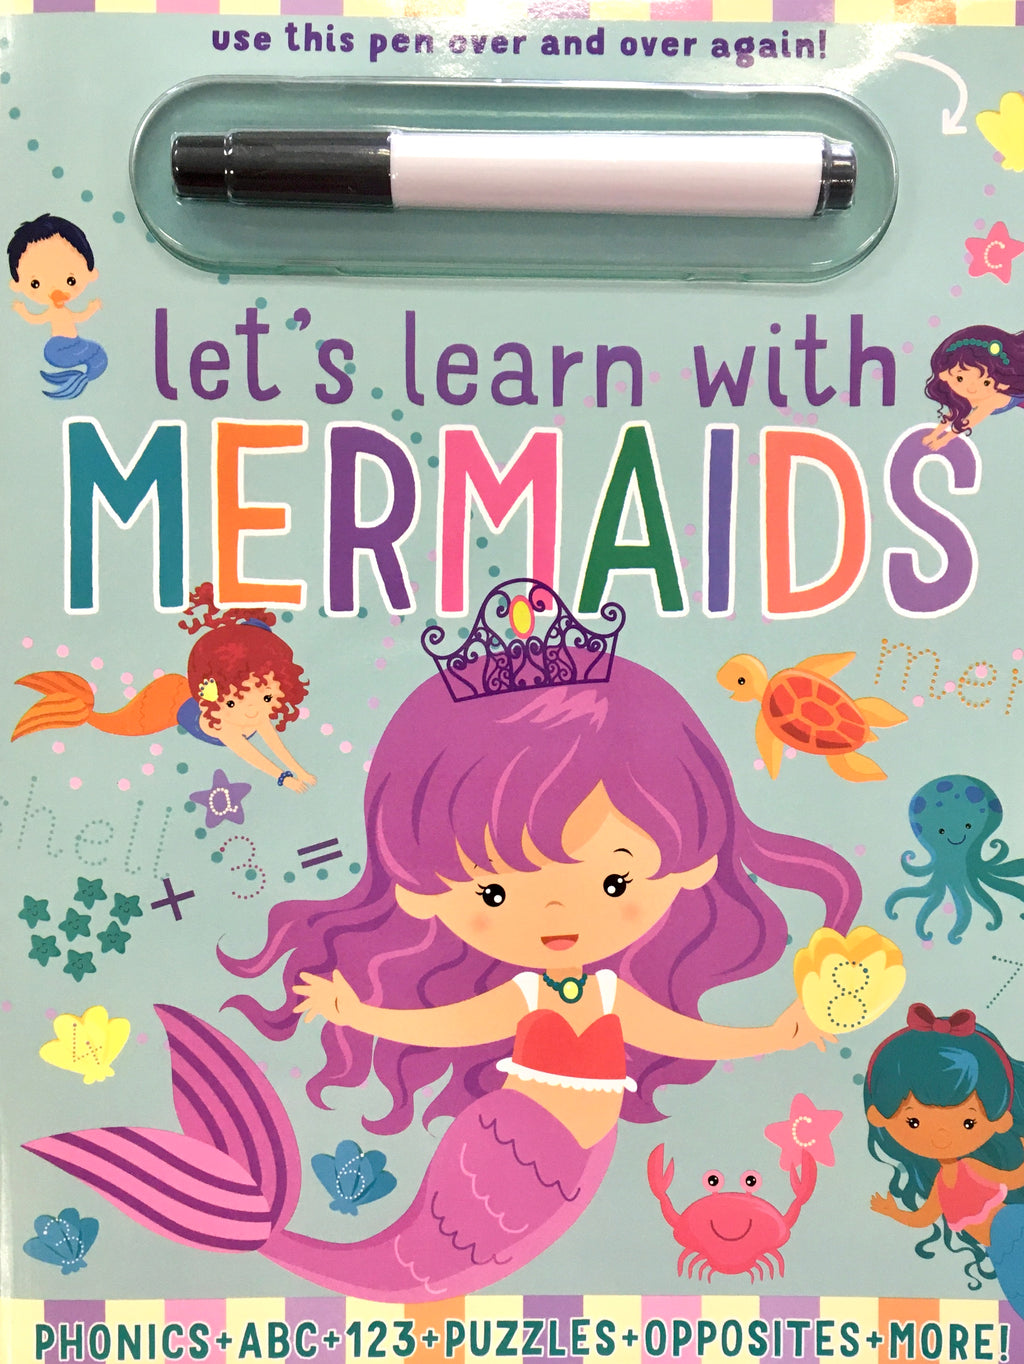 Let's learn with Mermaids